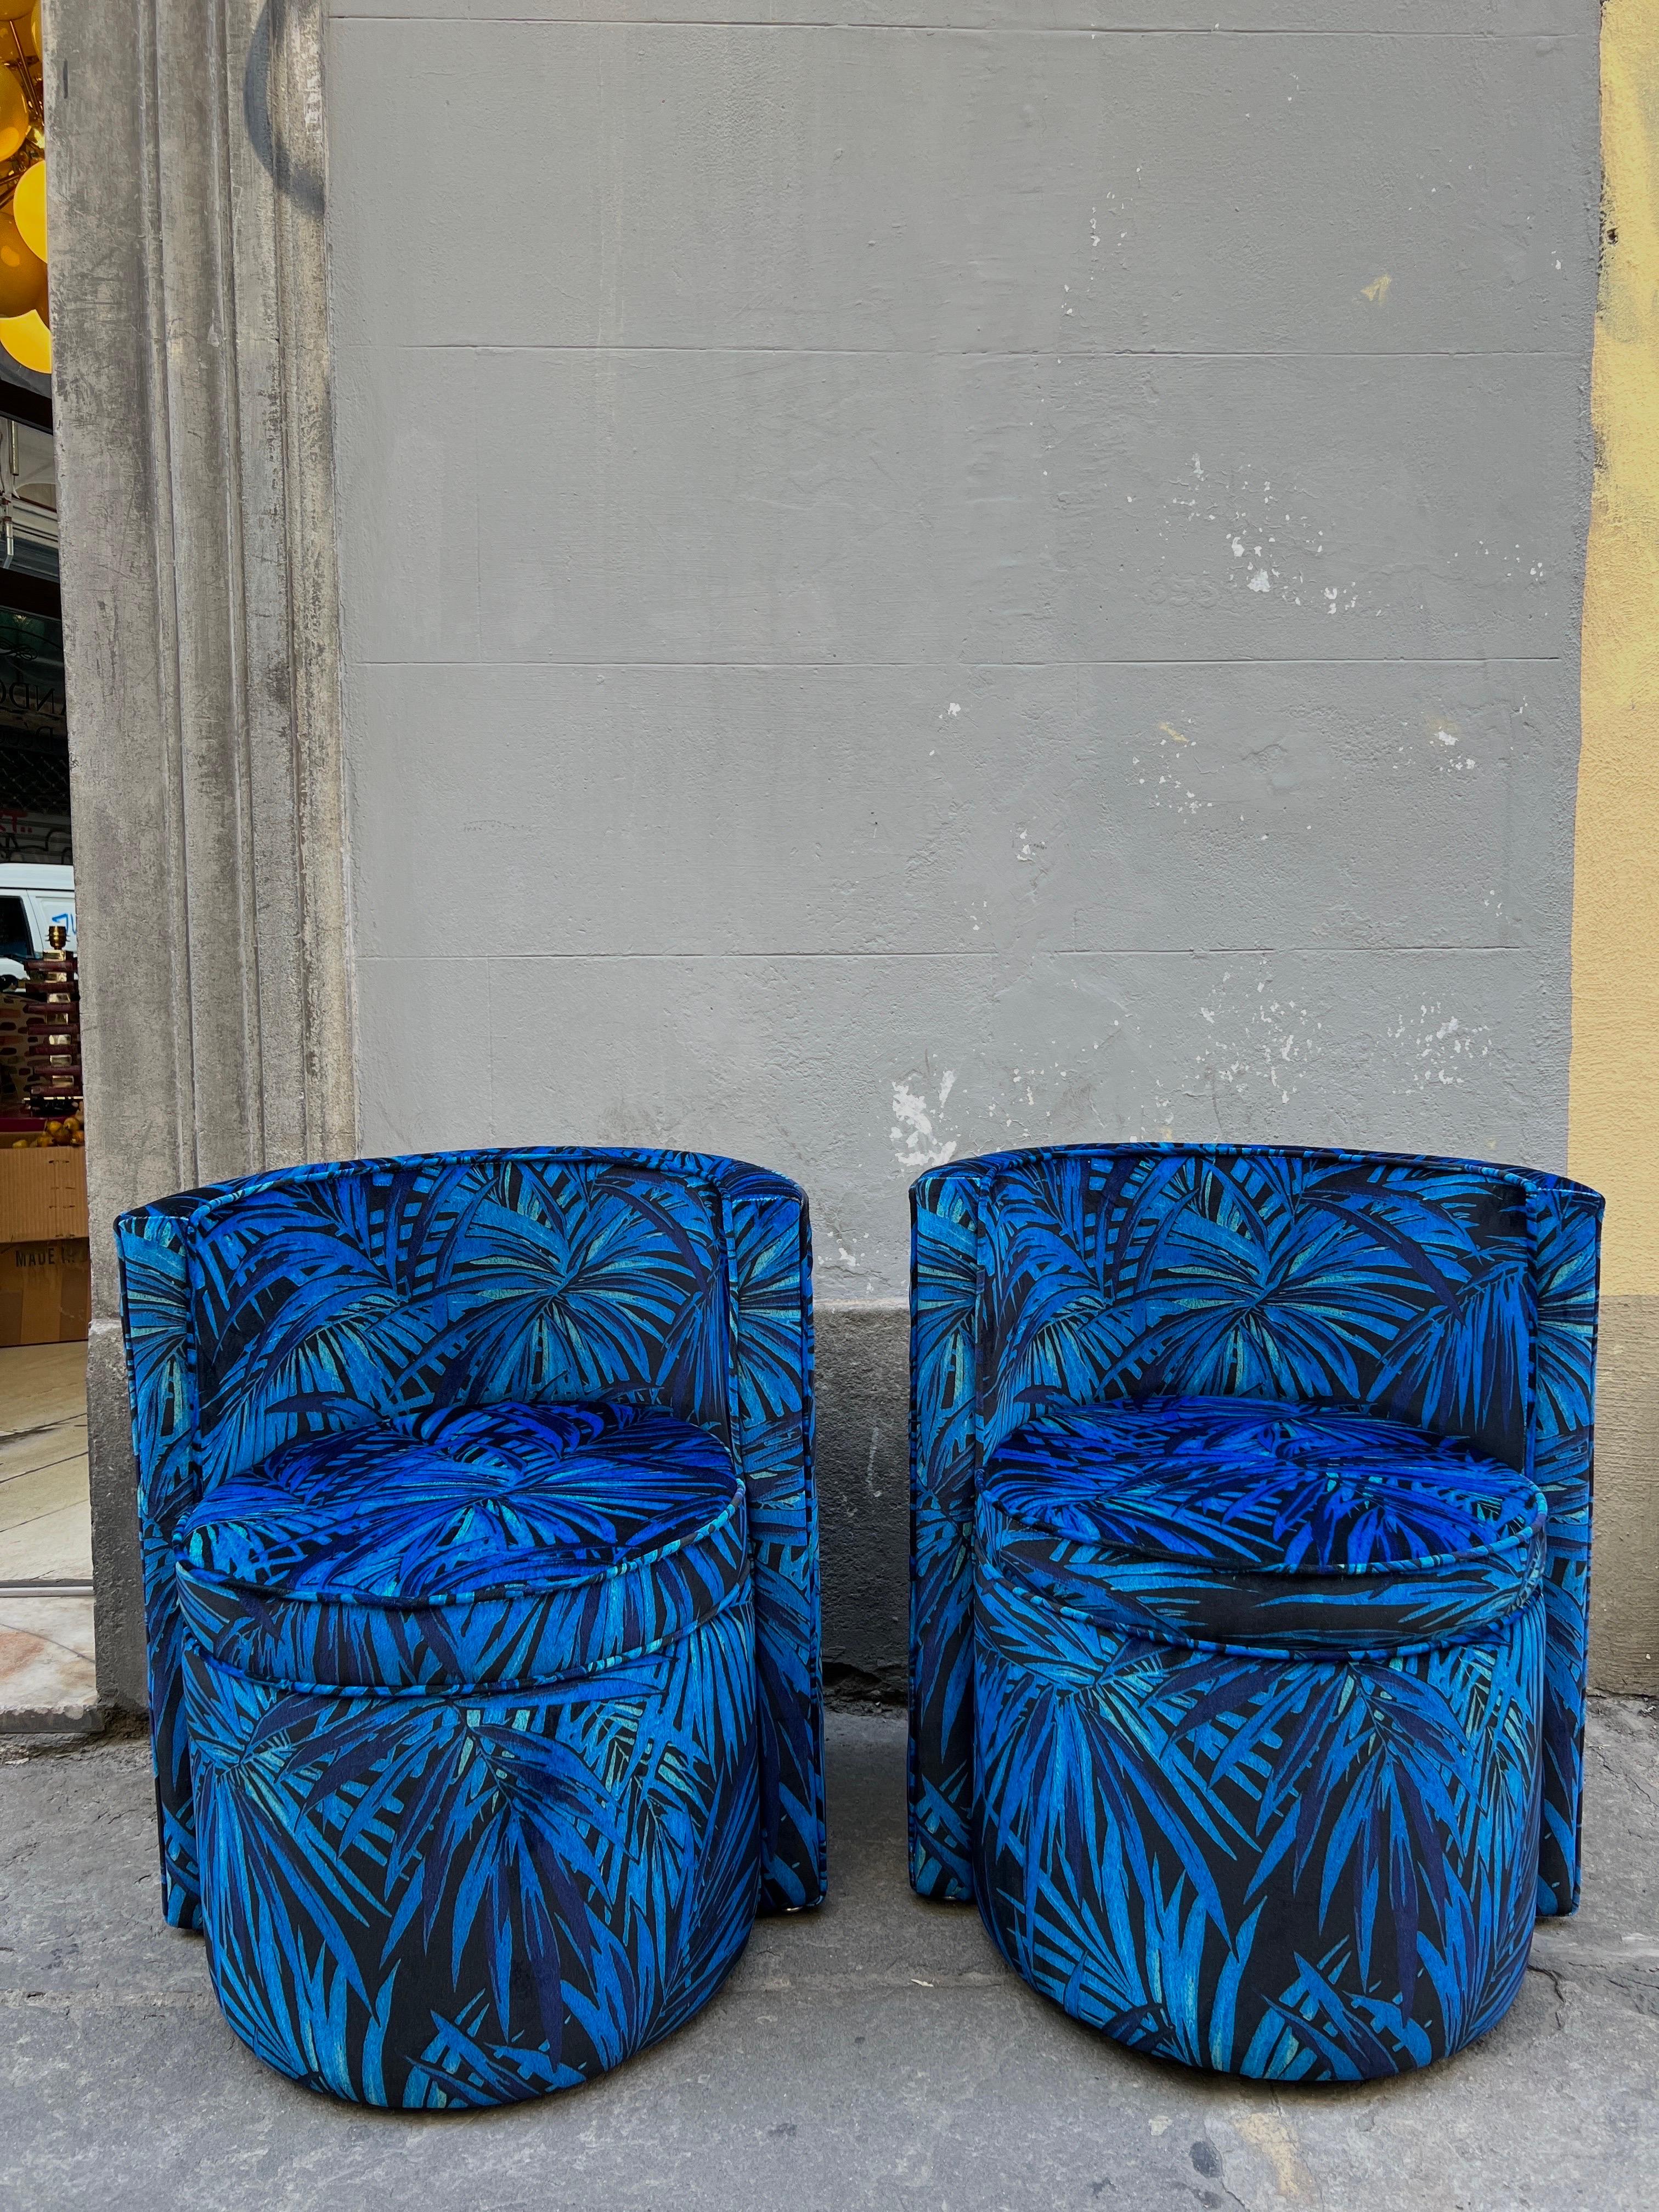 Pair of newly Upholstered  Armchairs  with Floral Velvet in Shades of Blue.
Perfect vintage condition.